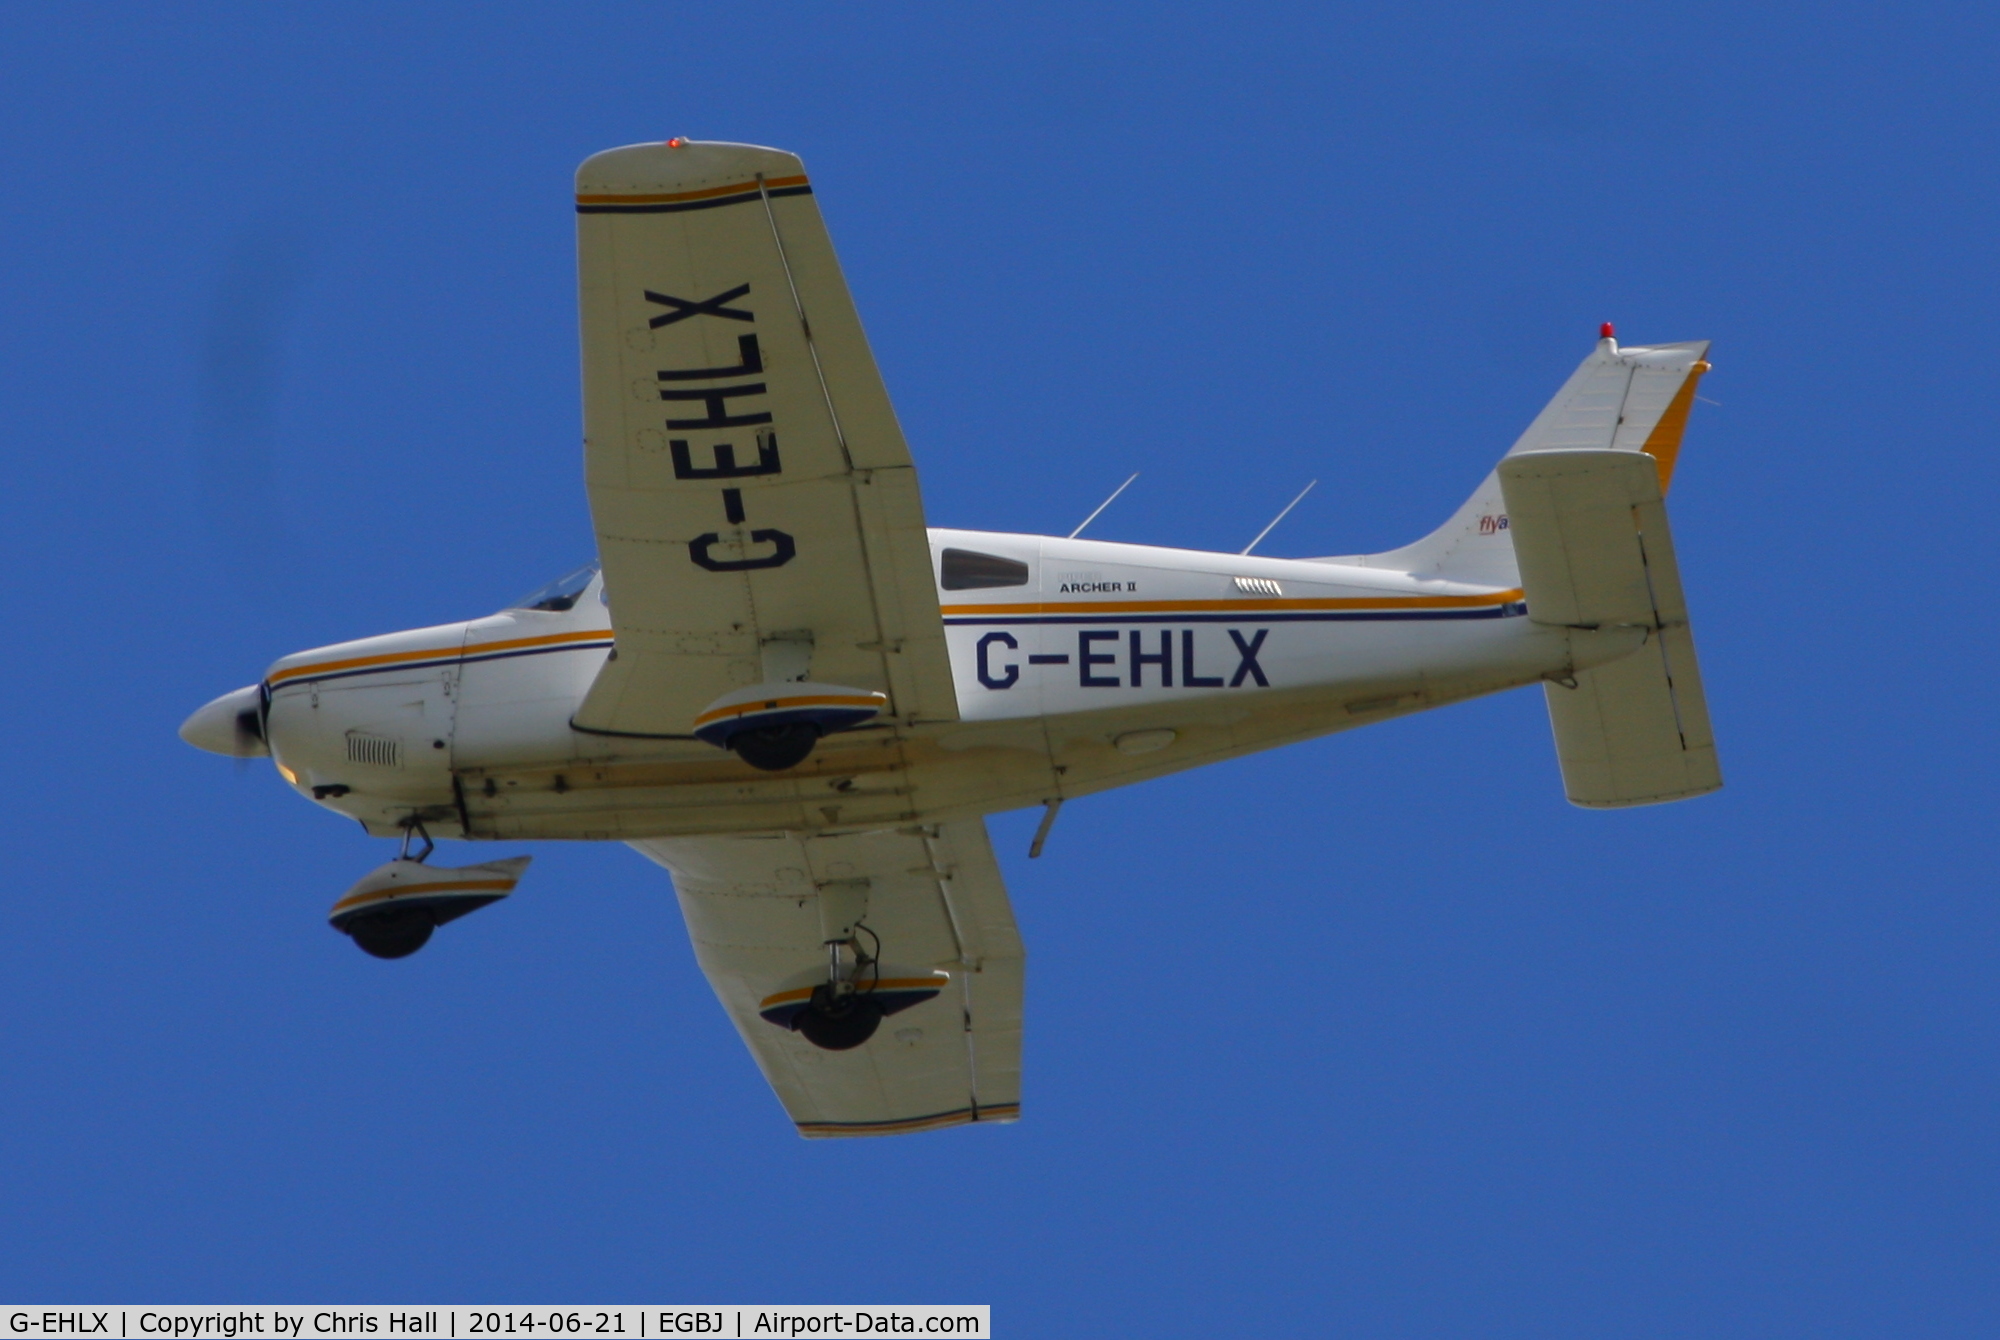 G-EHLX, 1980 Piper PA-28-181 Cherokee Archer II C/N 28-8090317, Visitor for Project Propeller 2014